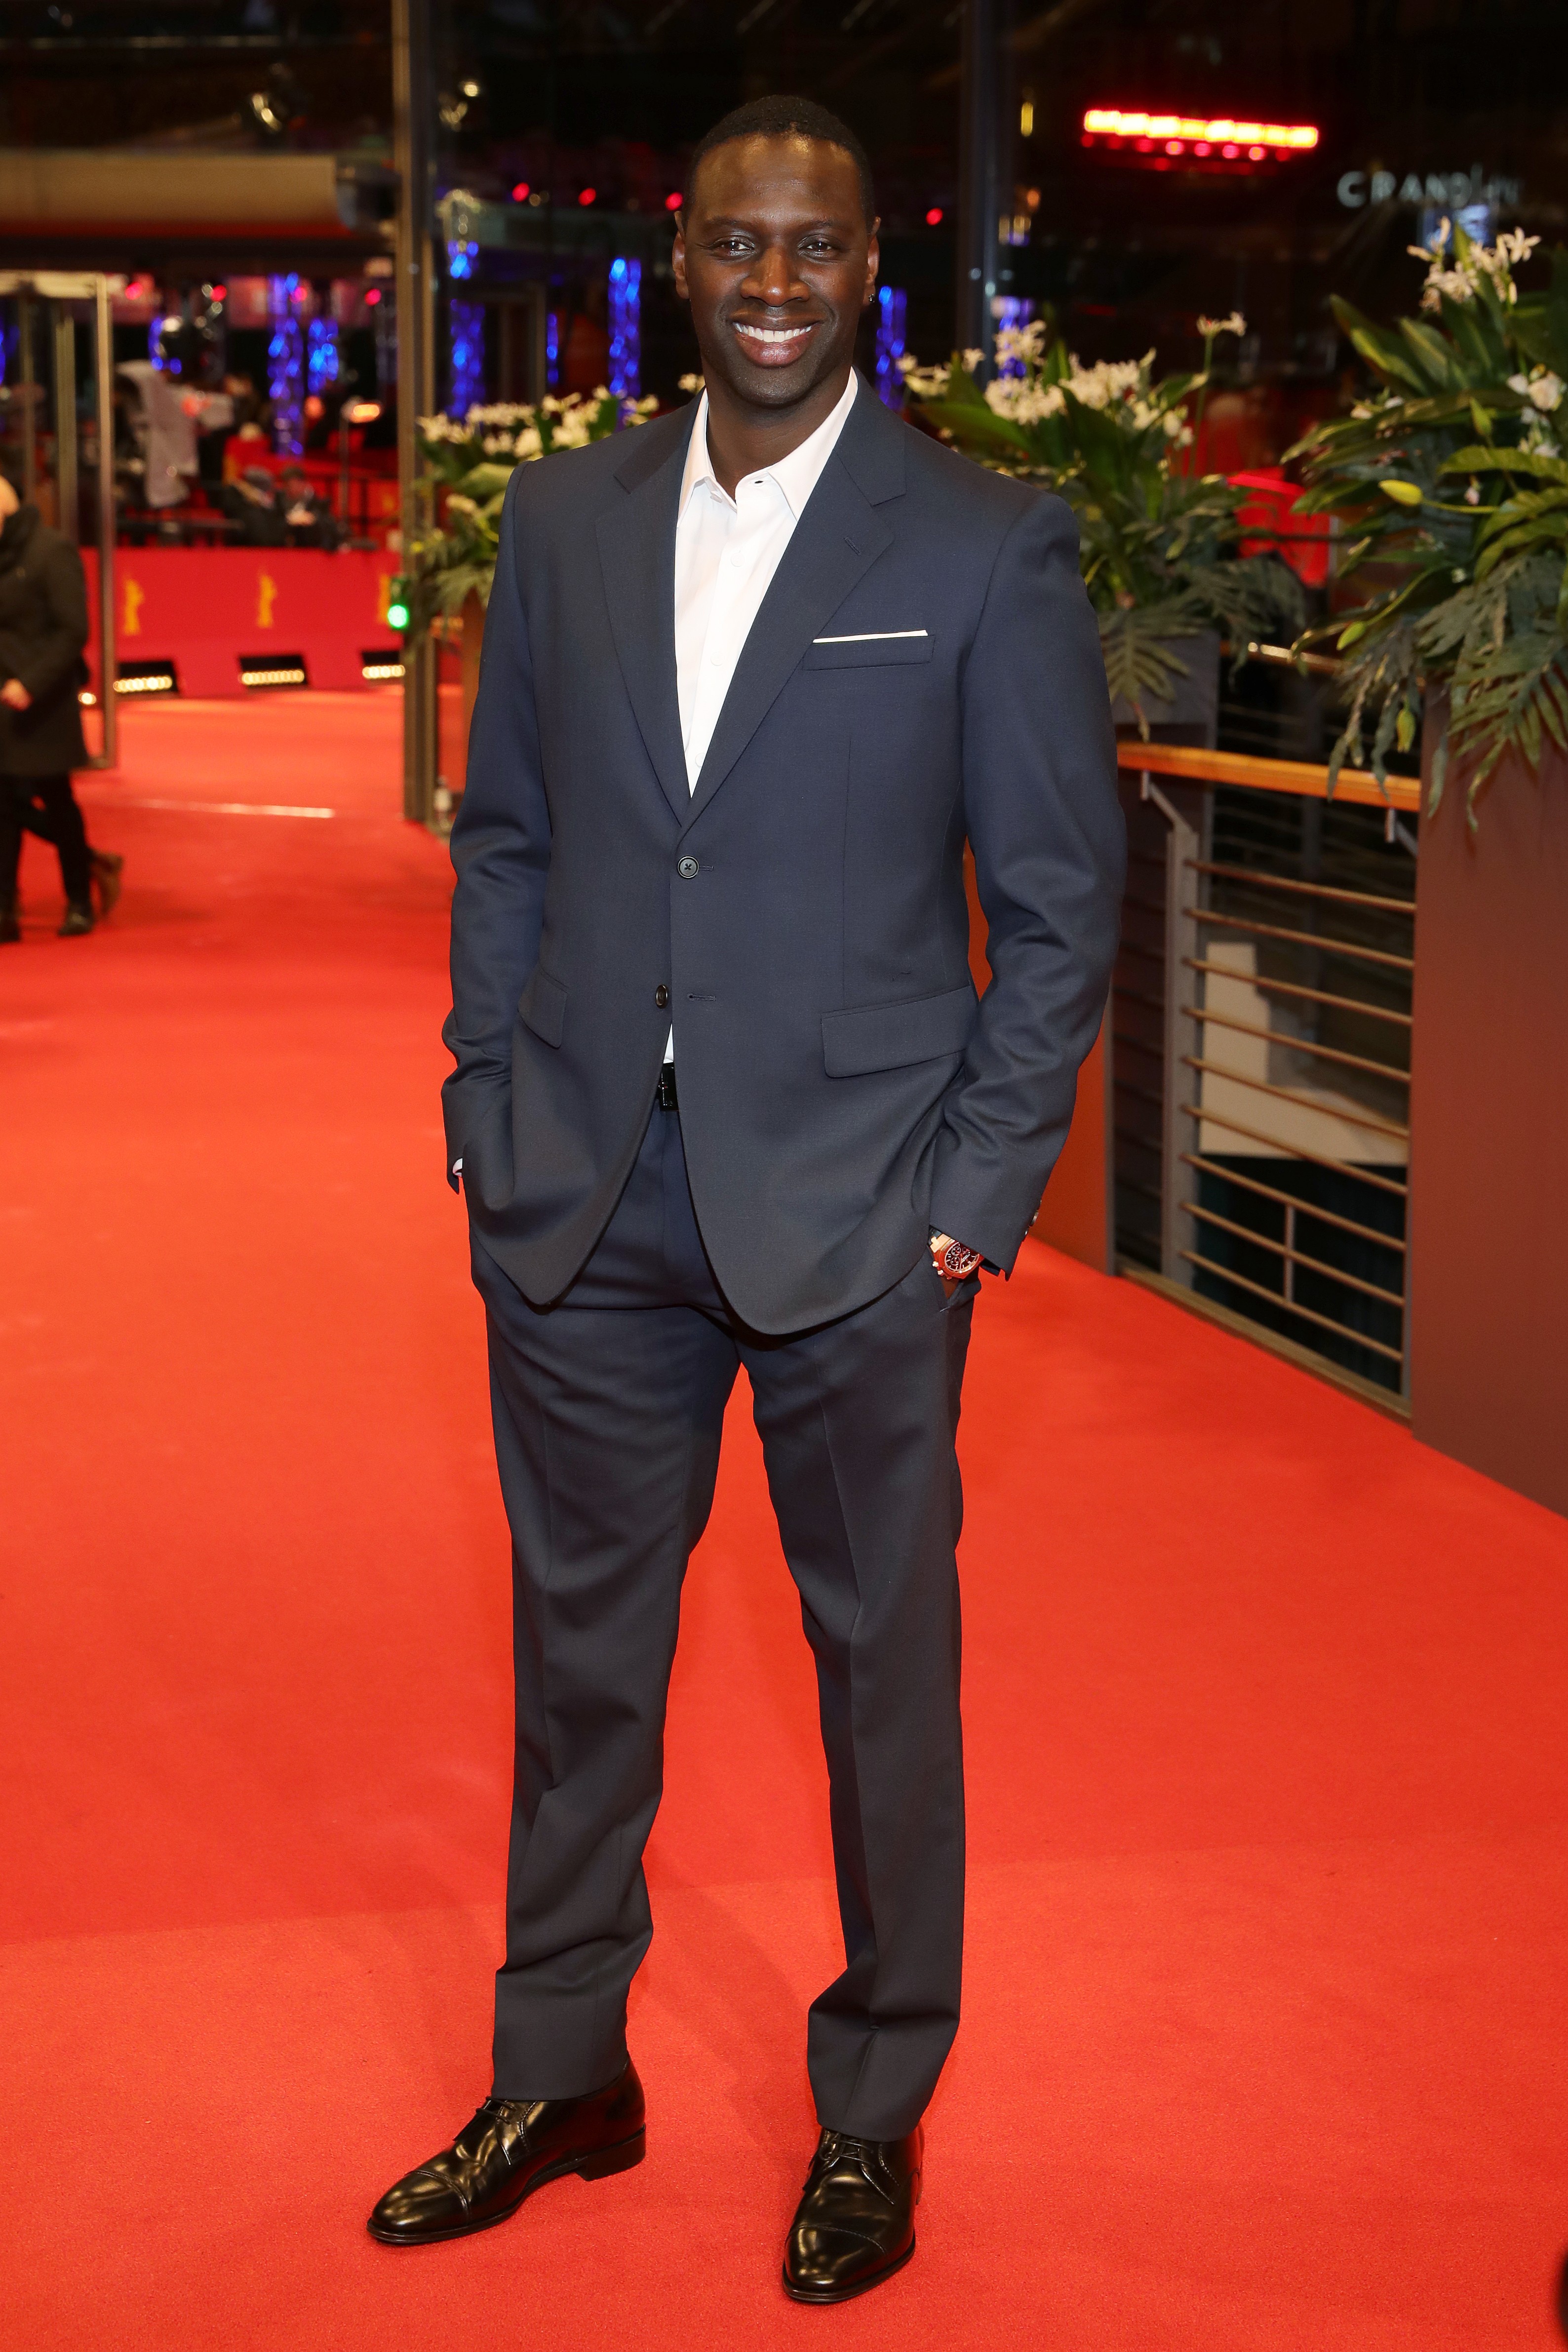 BERLIN, GERMANY - FEBRUARY 28: Omar Sy poses at the "Police" (Night Shift) premiere during the 70th Berlinale International Film Festival Berlin at Berlinale Palace on February 28, 2020 in Berlin, Germany. (Photo by Andreas Rentz/Getty Images) (Foto: Getty Images)